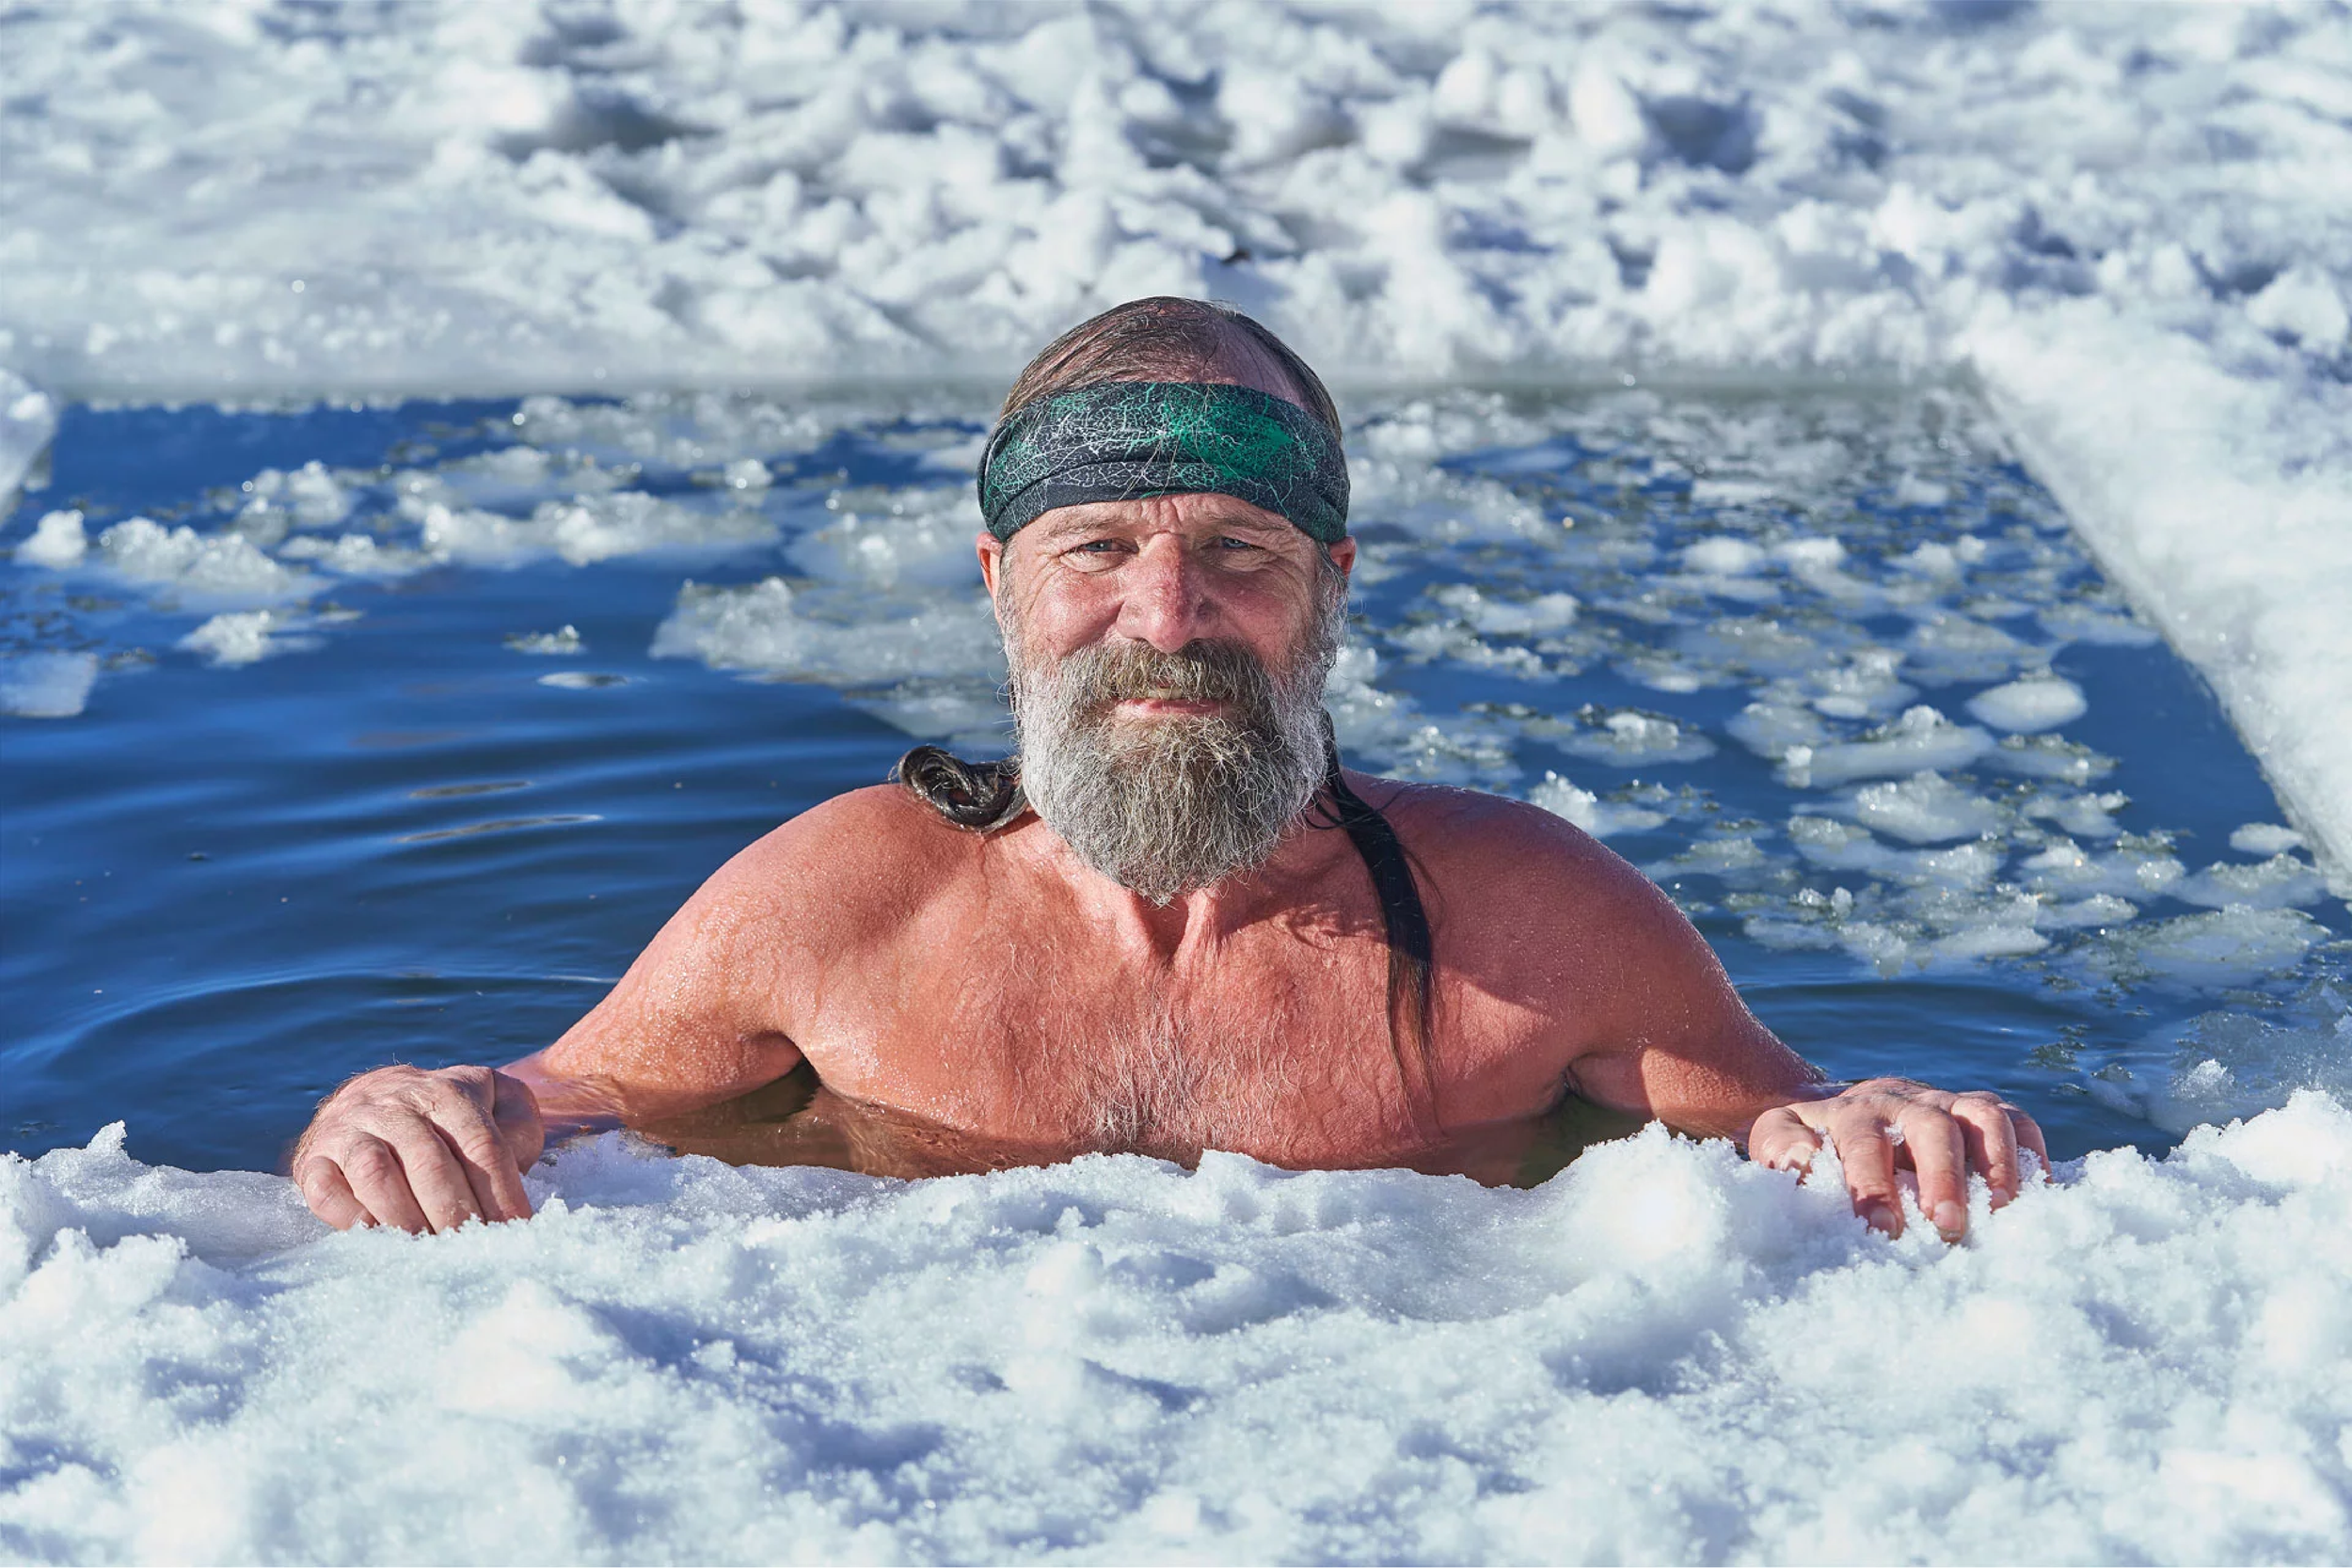 All About the Wim Hof Breathing Method